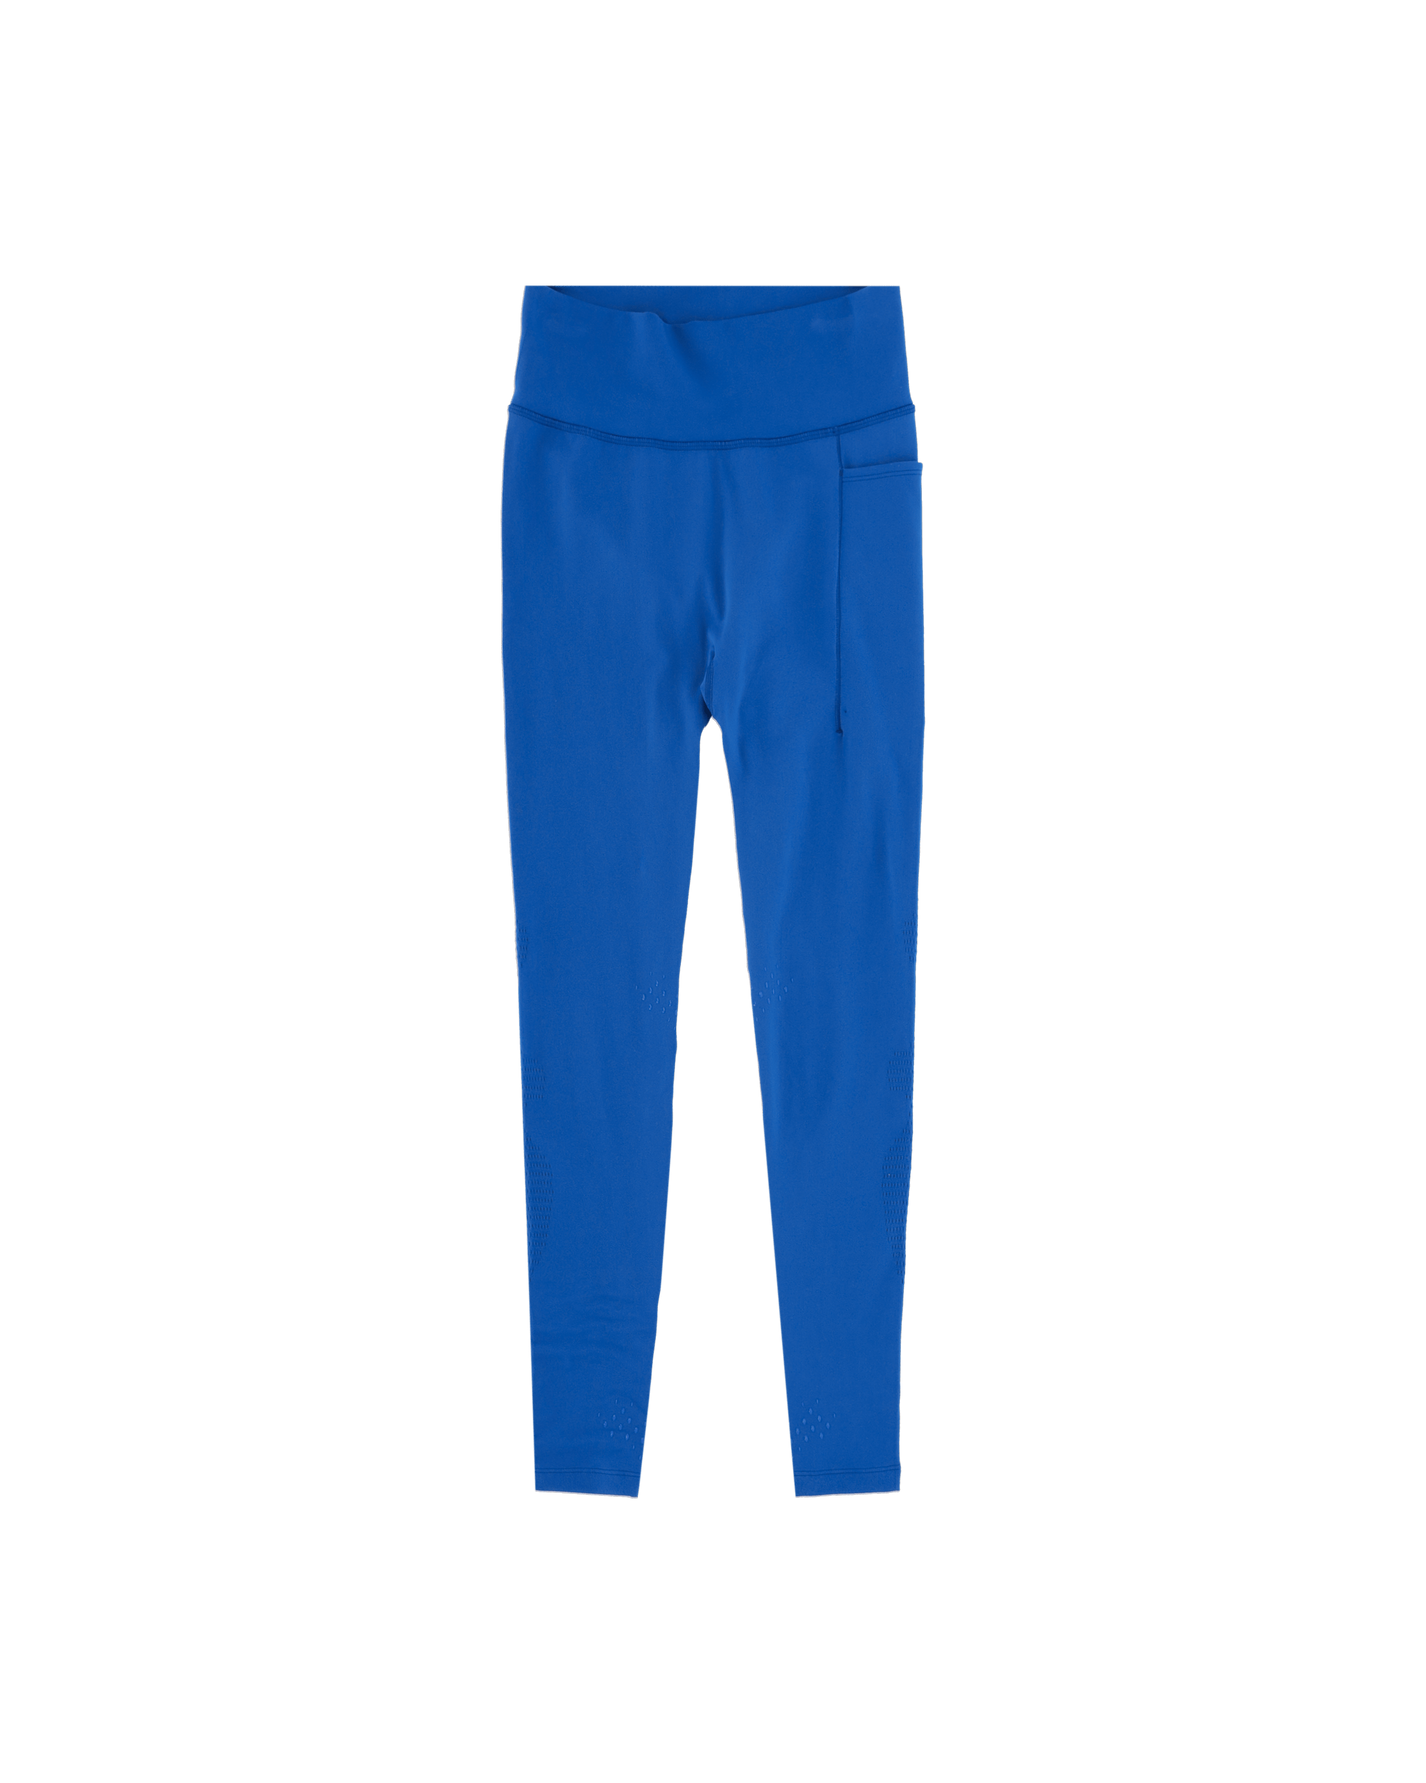 Nike Special Project Wmns Nrg Mmw Df Tight Blue Jay Pants Trousers DD9427-409